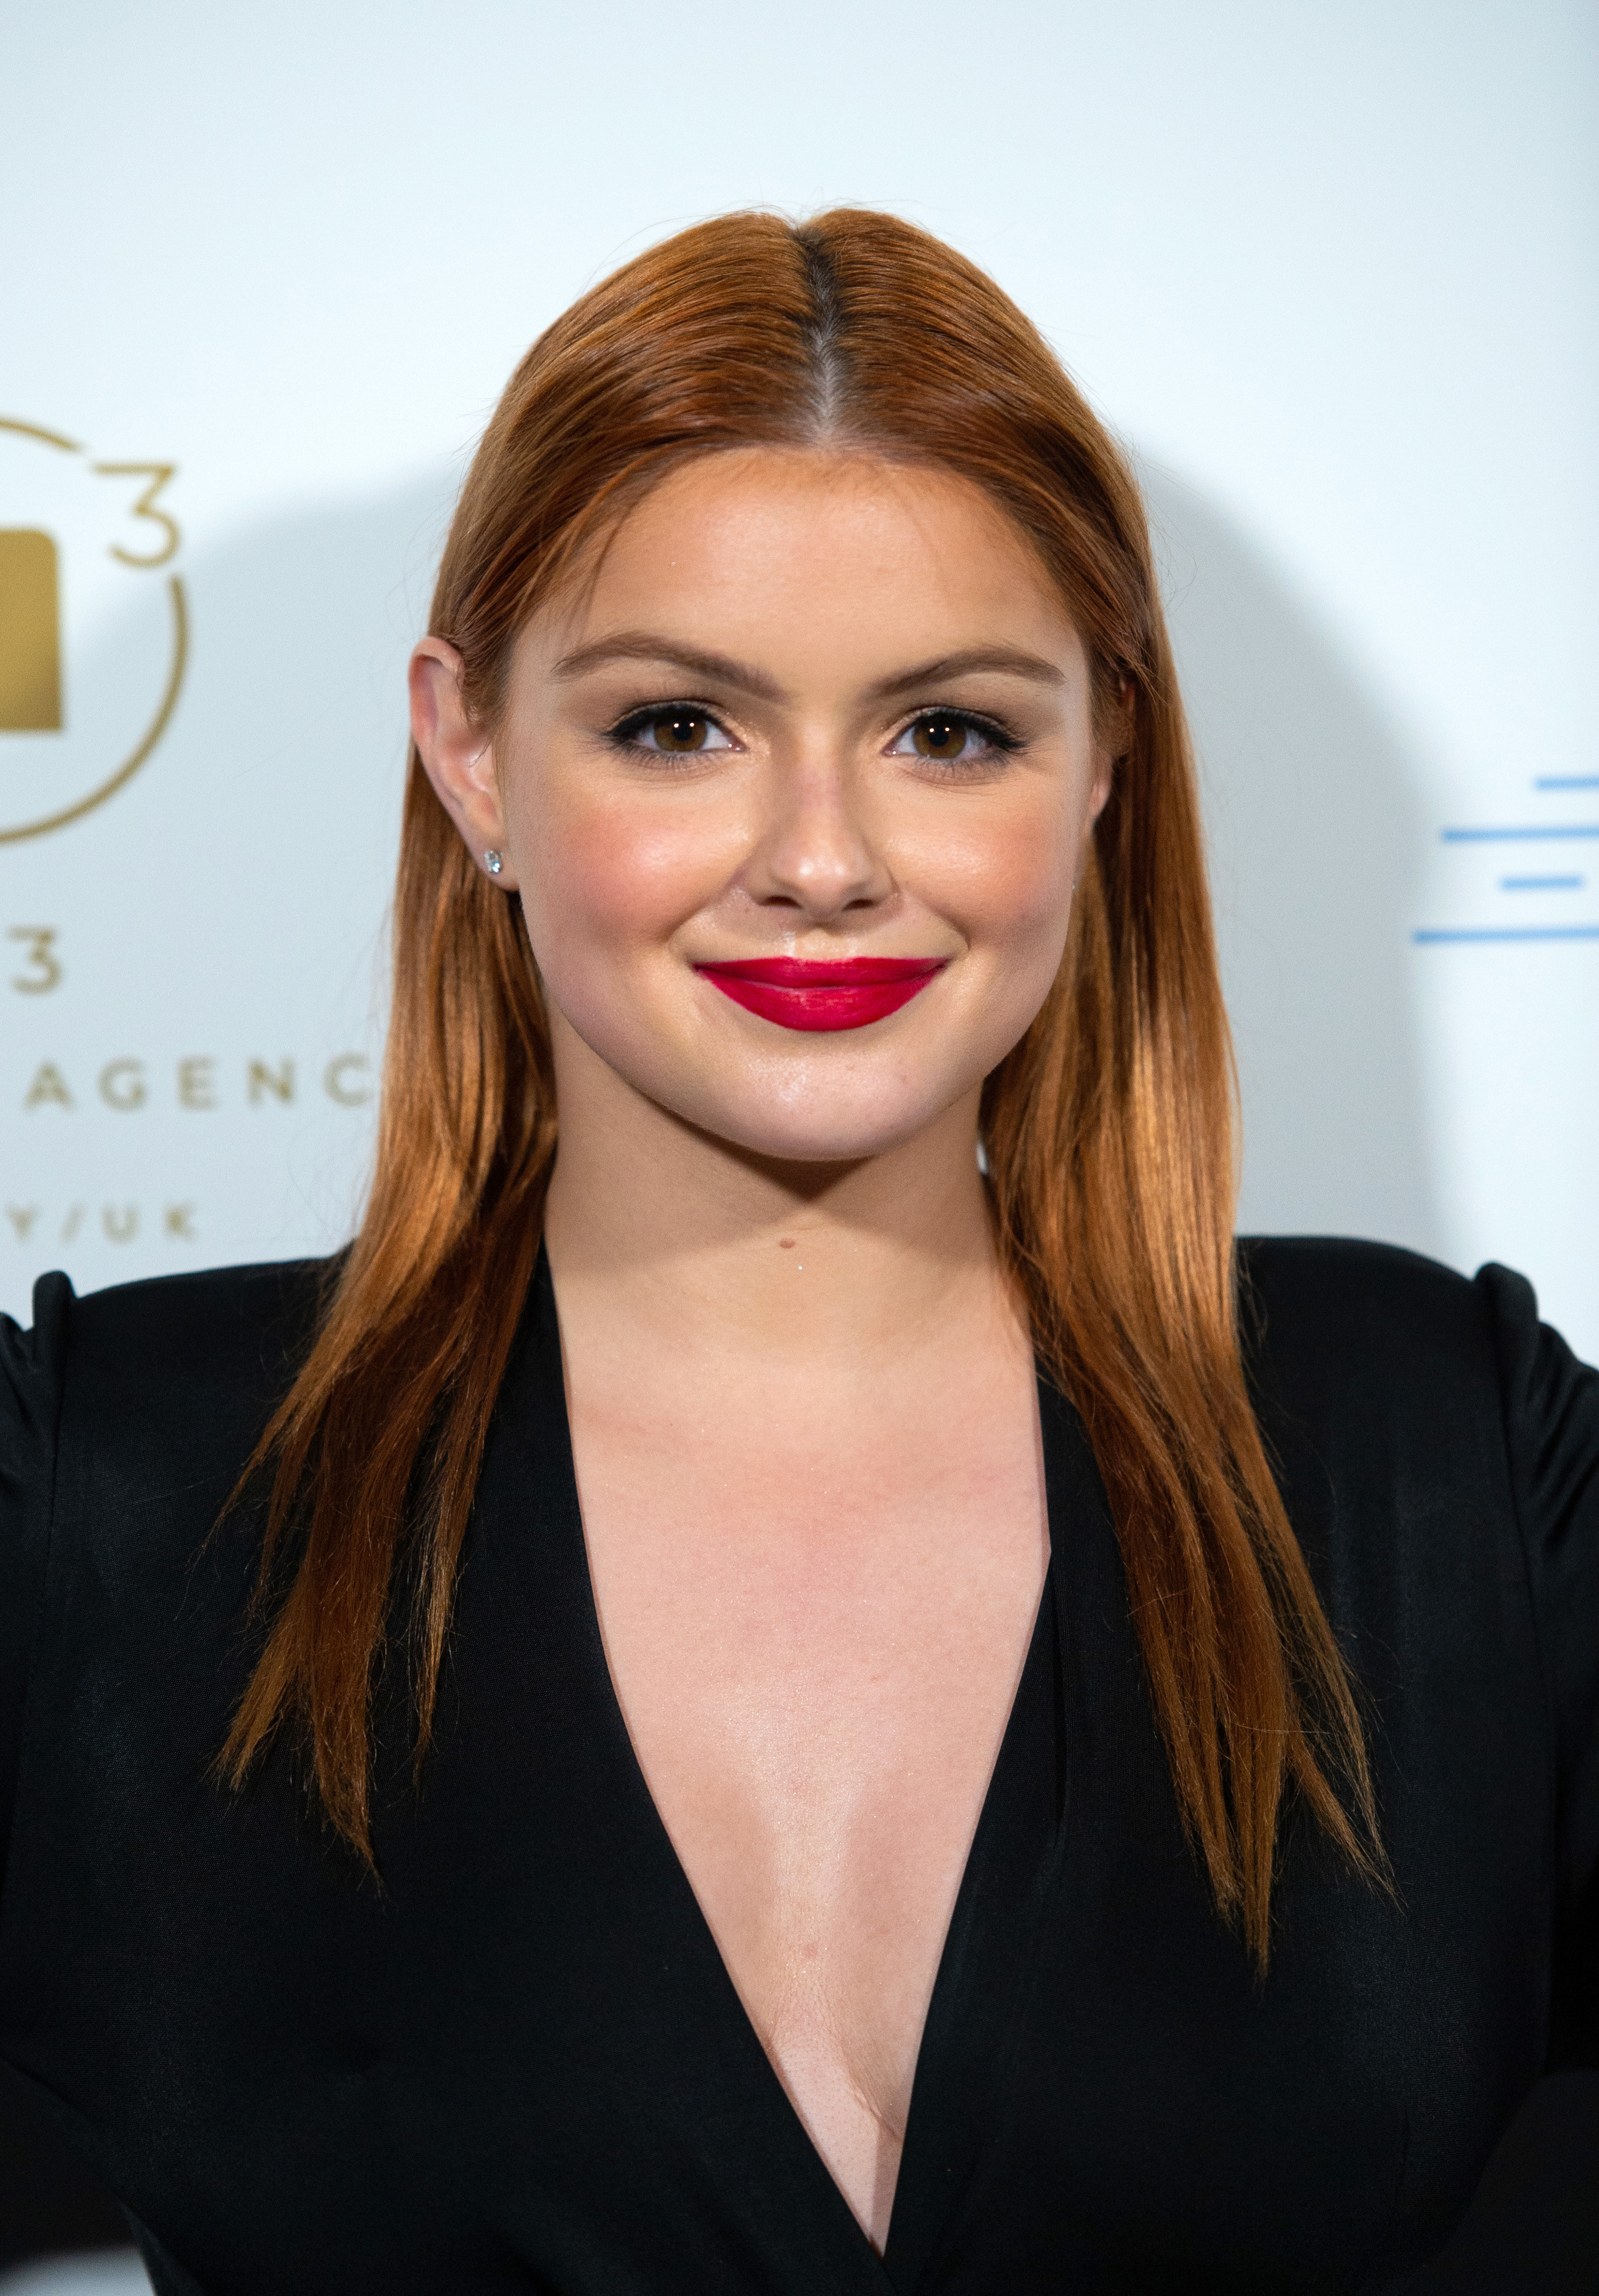 Ariel Winter Sexy - 19 Child Stars Whose Parents Chose That Life For Them